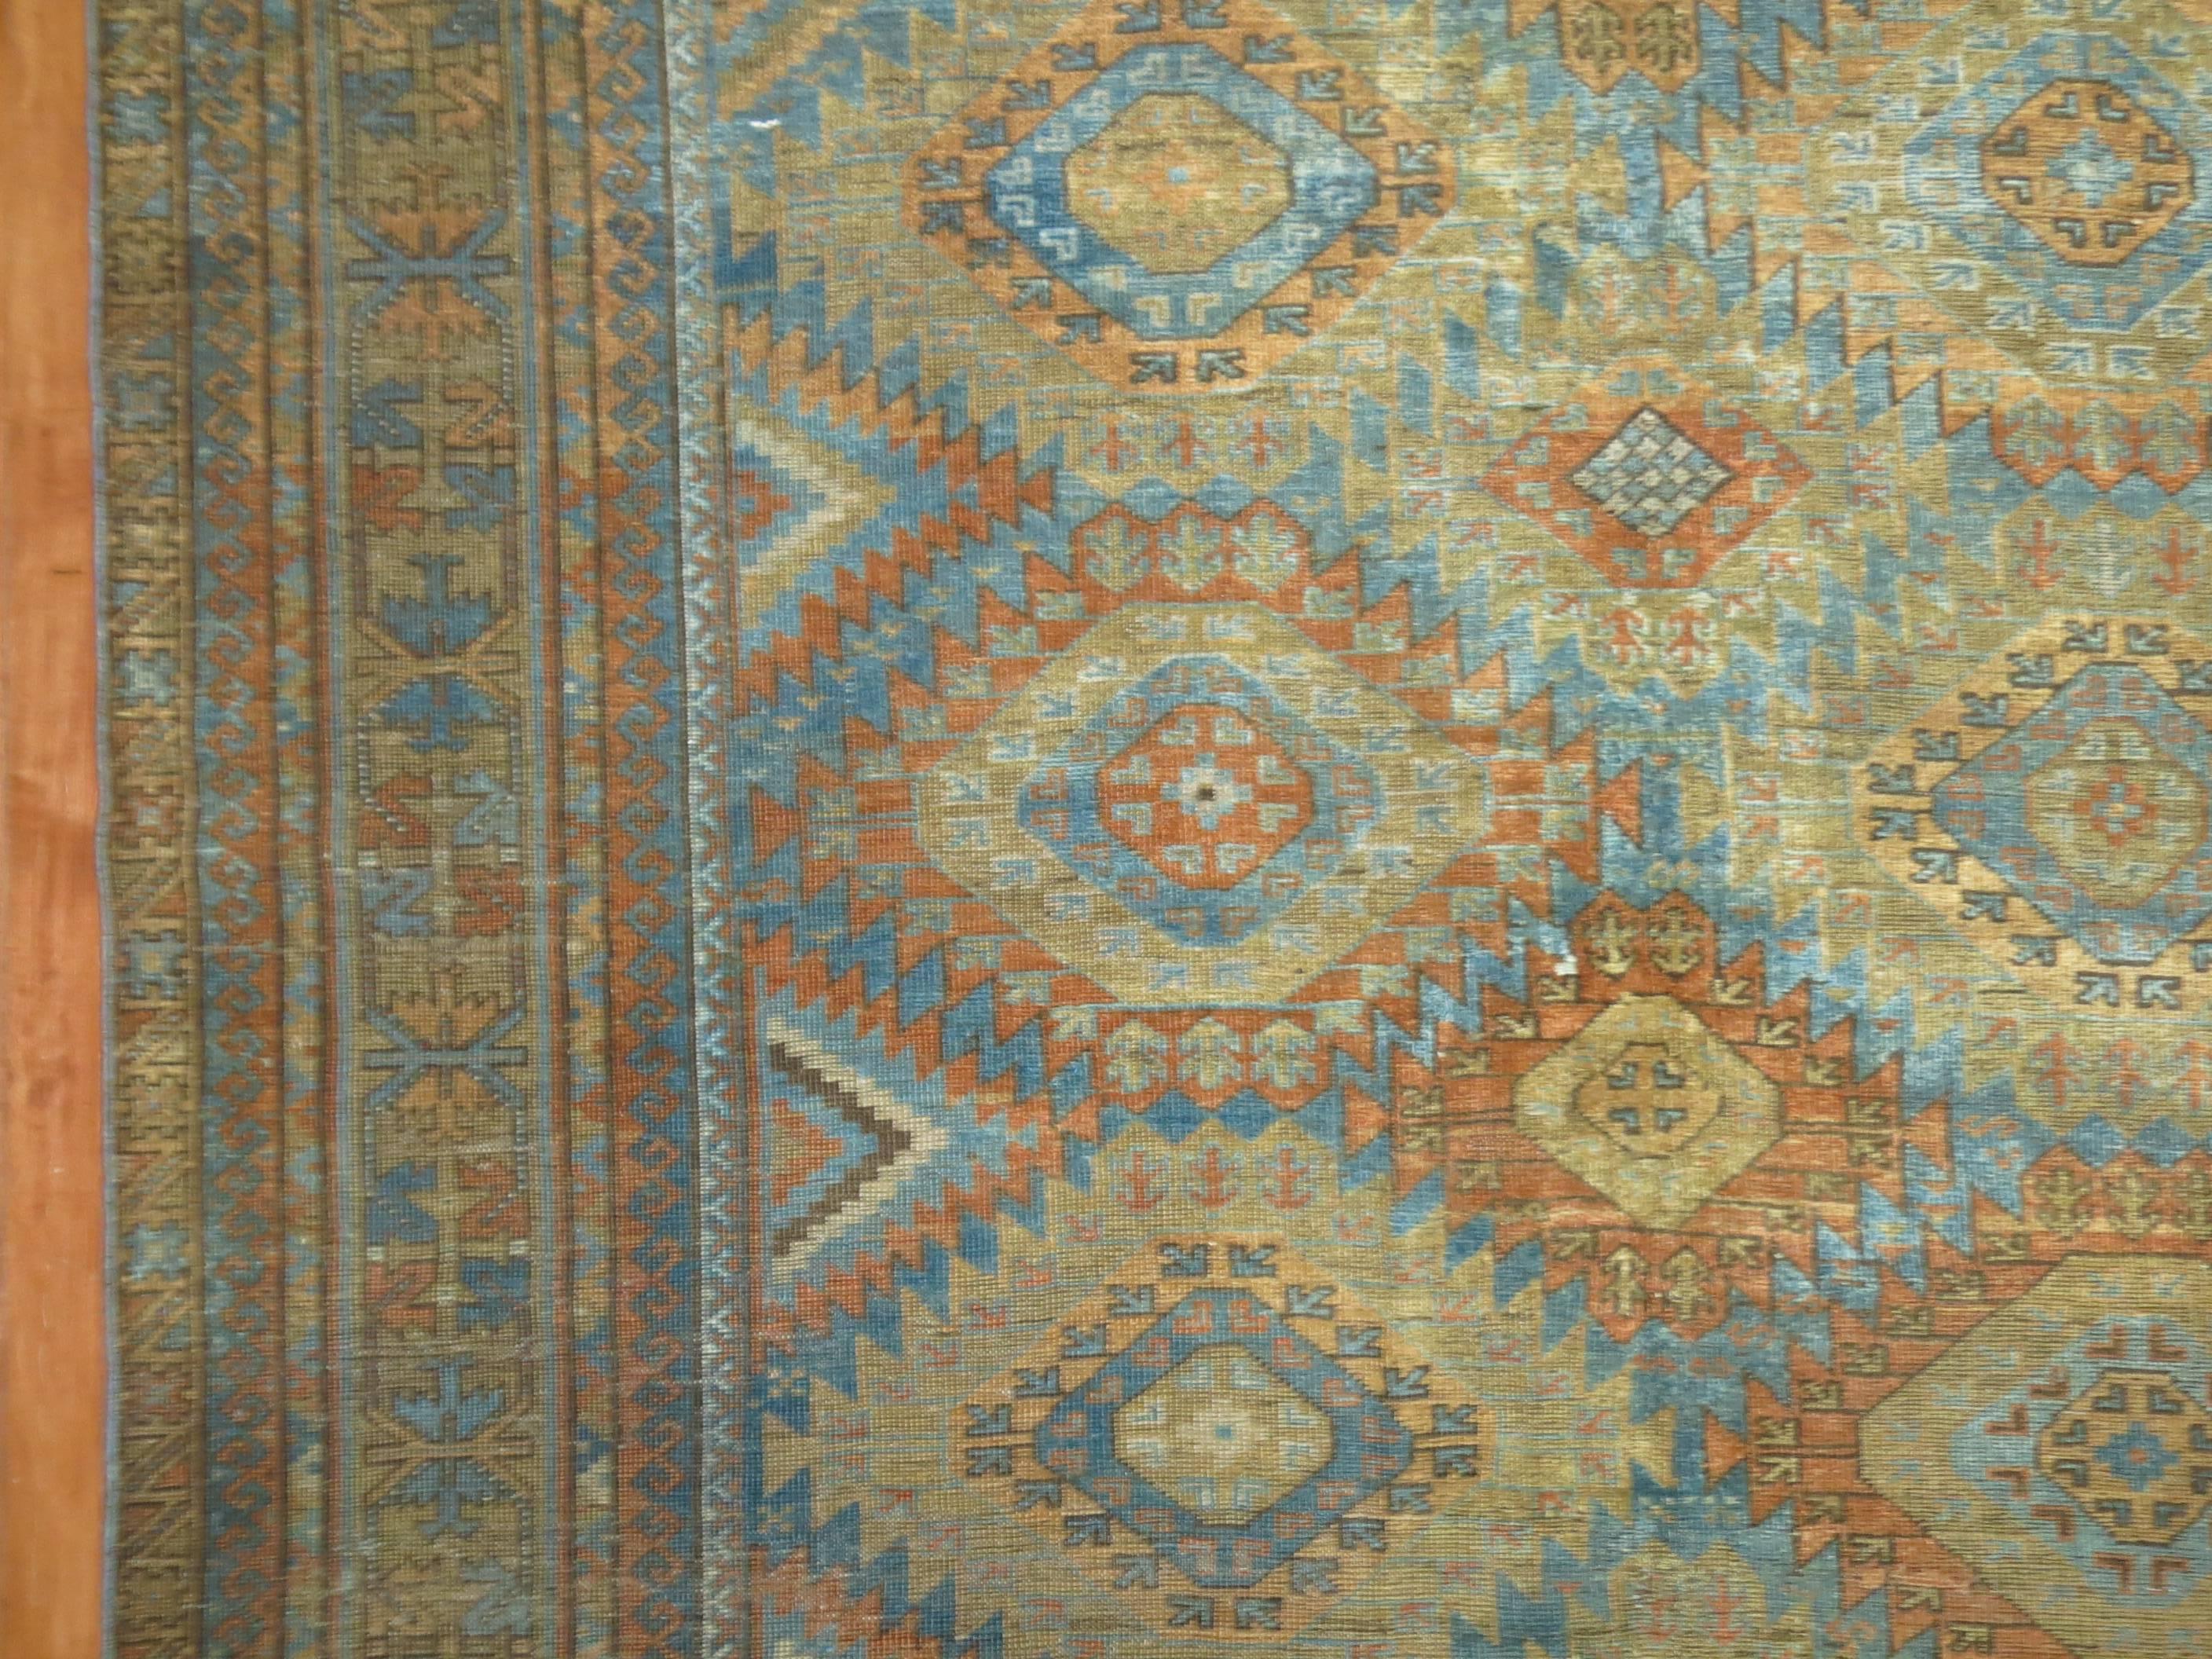 Hand-Knotted Tribal Antique Blue Caramel Persian Balouch Carpet